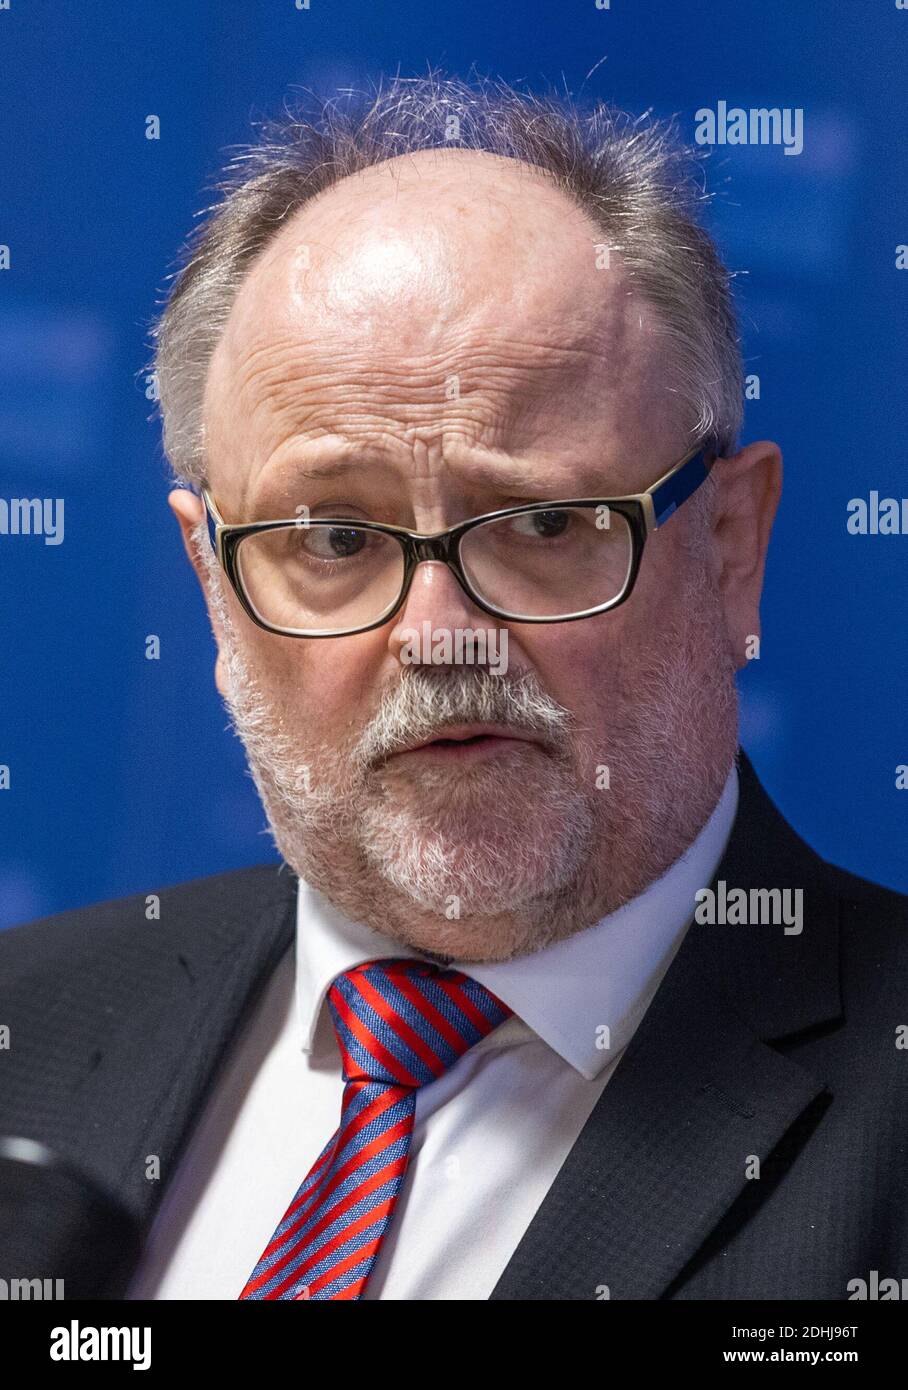 Schwerin, Germany. 12th Nov, 2020. Reinhard Müller, Head of the Department for the Protection of the Constitution, in the Ministry of the Interior of Mecklenburg-Vorpommern at a press conference to present the 2019 report on the protection of the constitution. Credit: Jens Büttner/dpa-Zentralbild/ZB/dpa/Alamy Live News Stock Photo